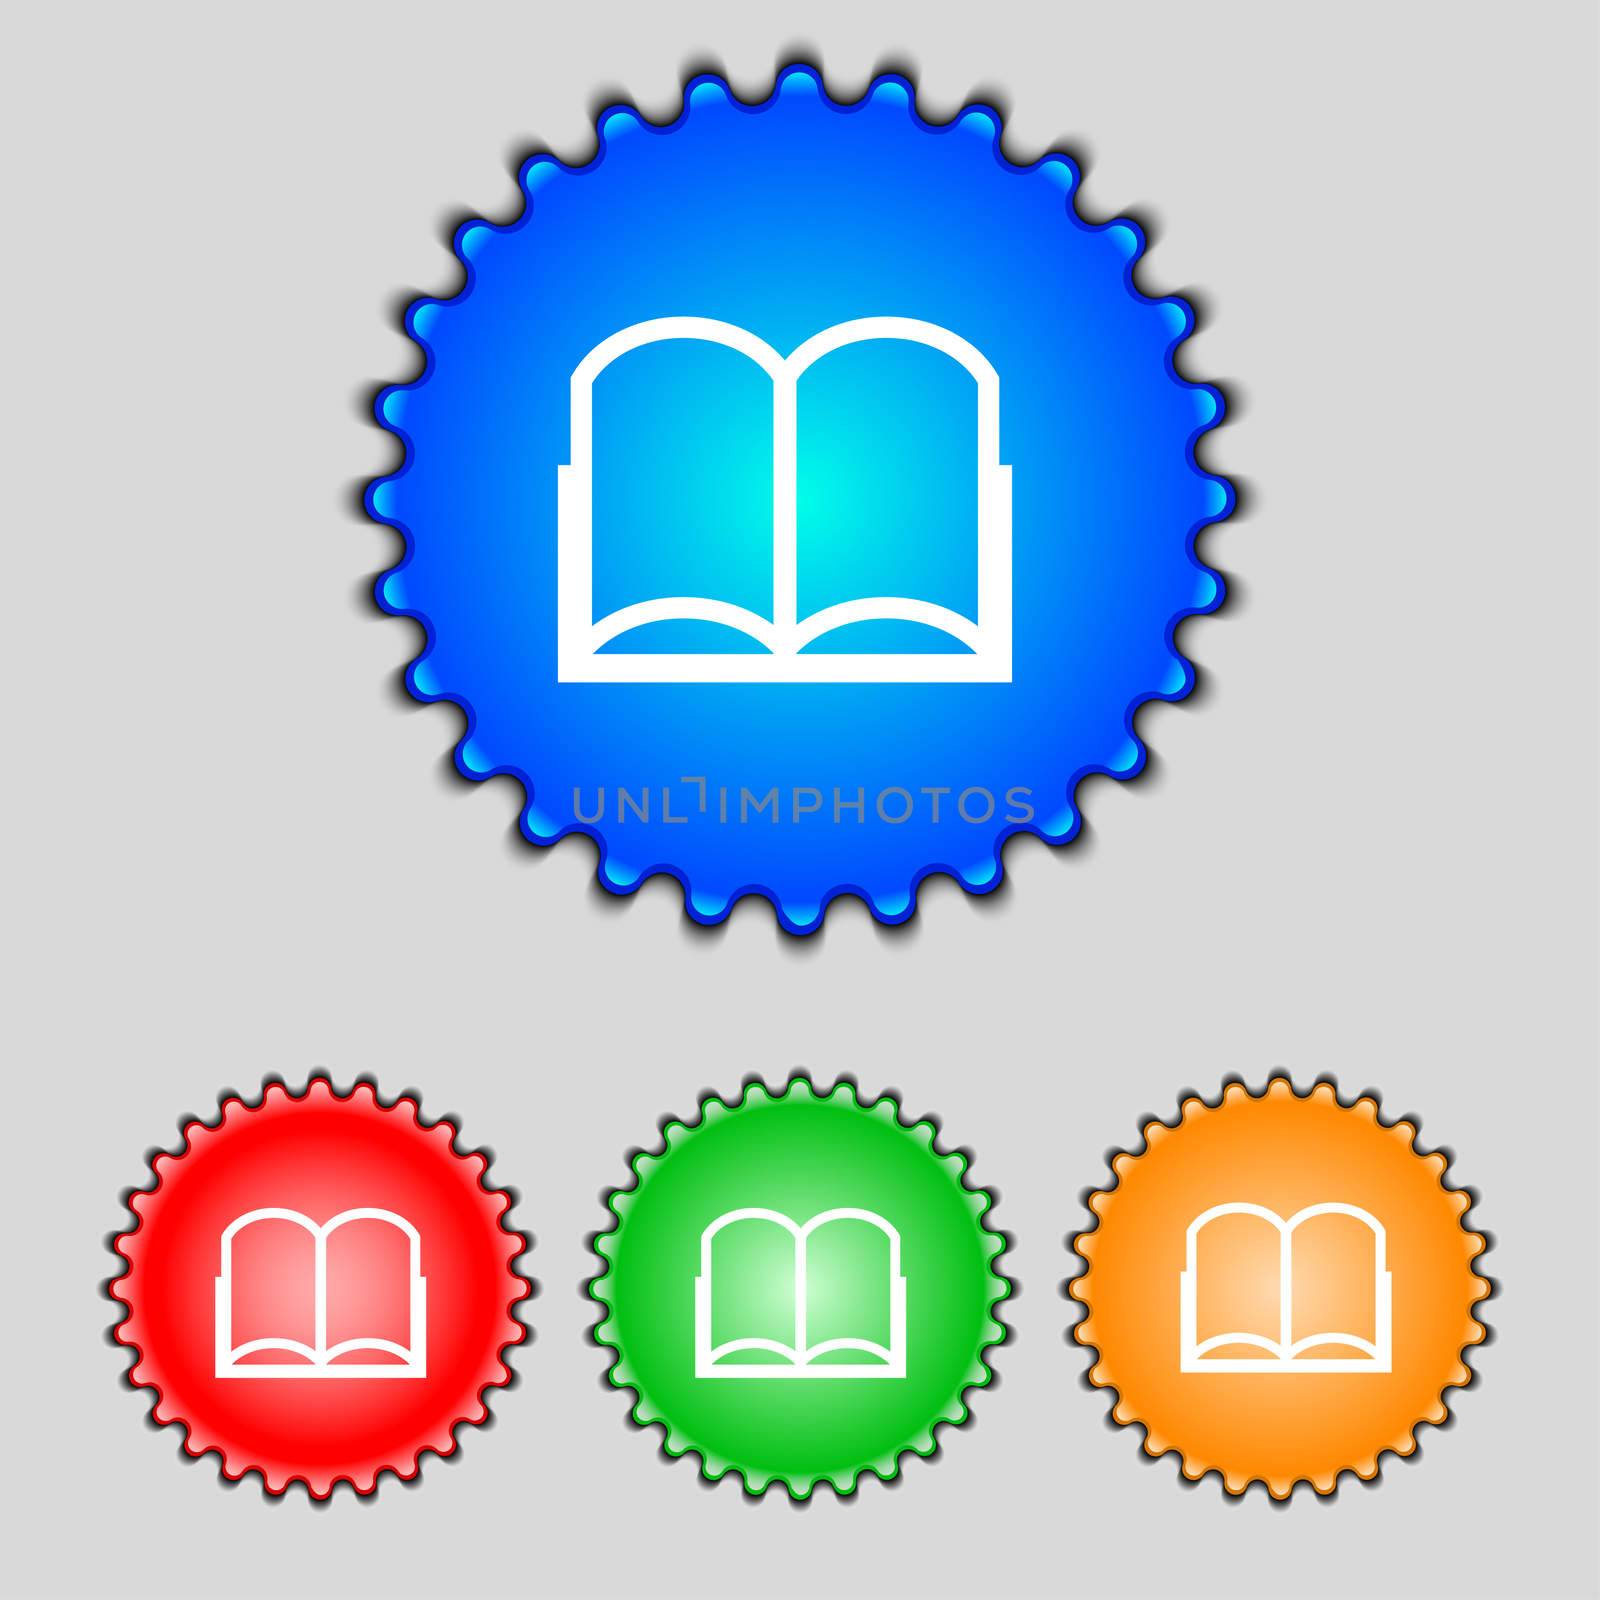 Book sign icon. Open book symbol. Set of colored buttons.  by serhii_lohvyniuk